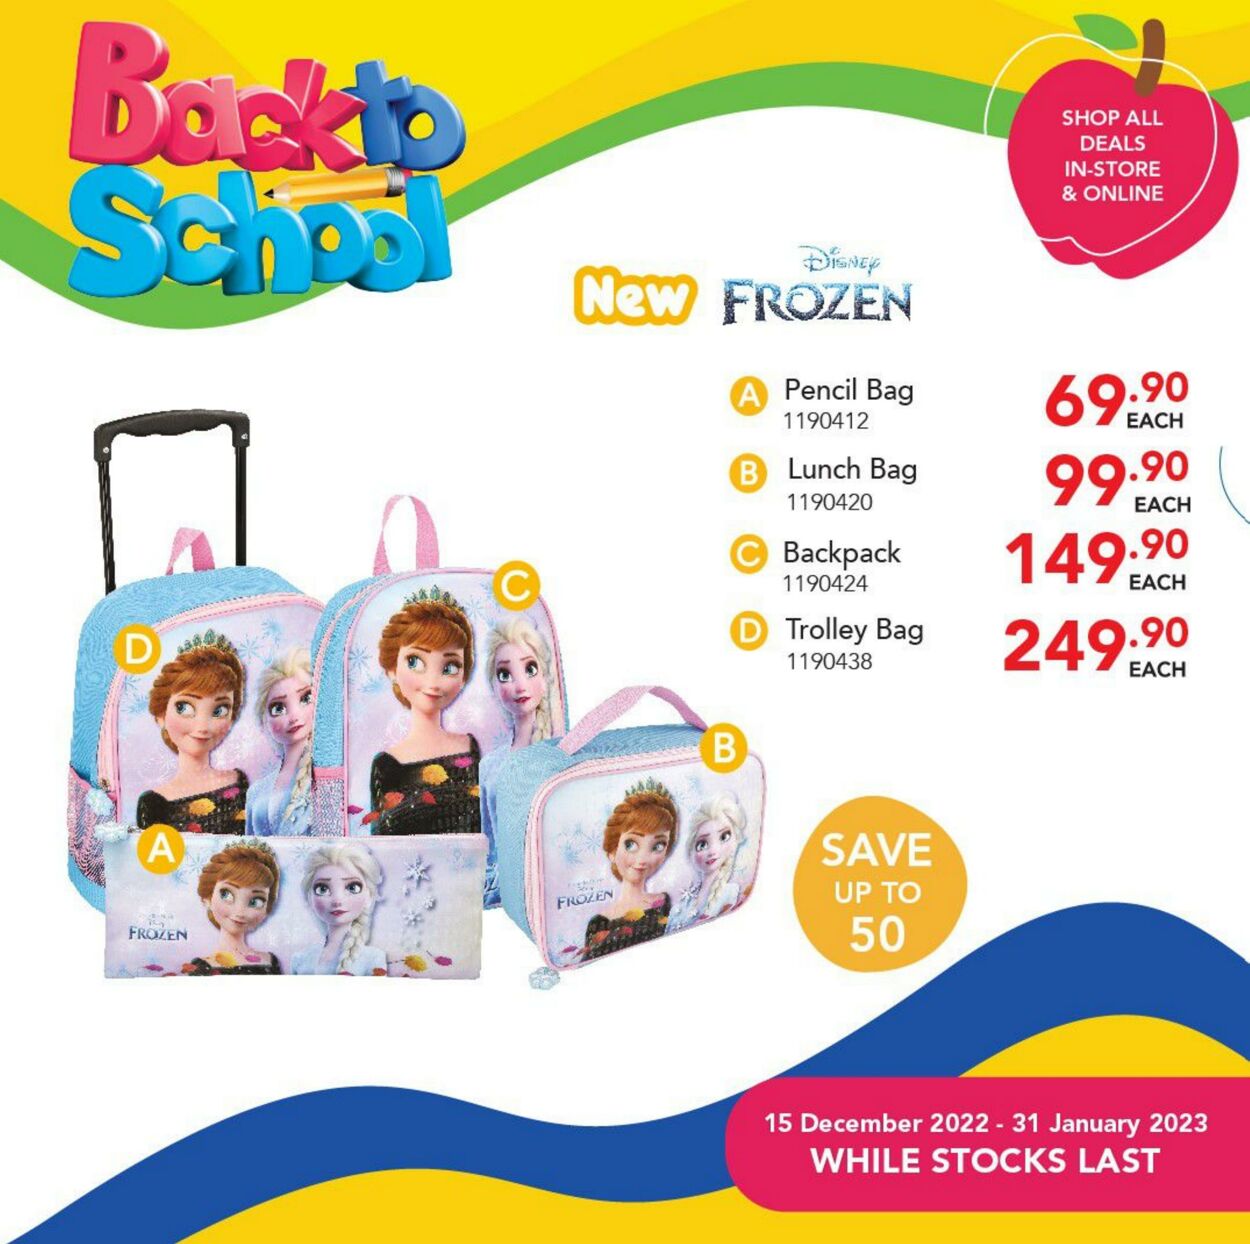 Special Toys R Us 15.12.2022 - 31.01.2023